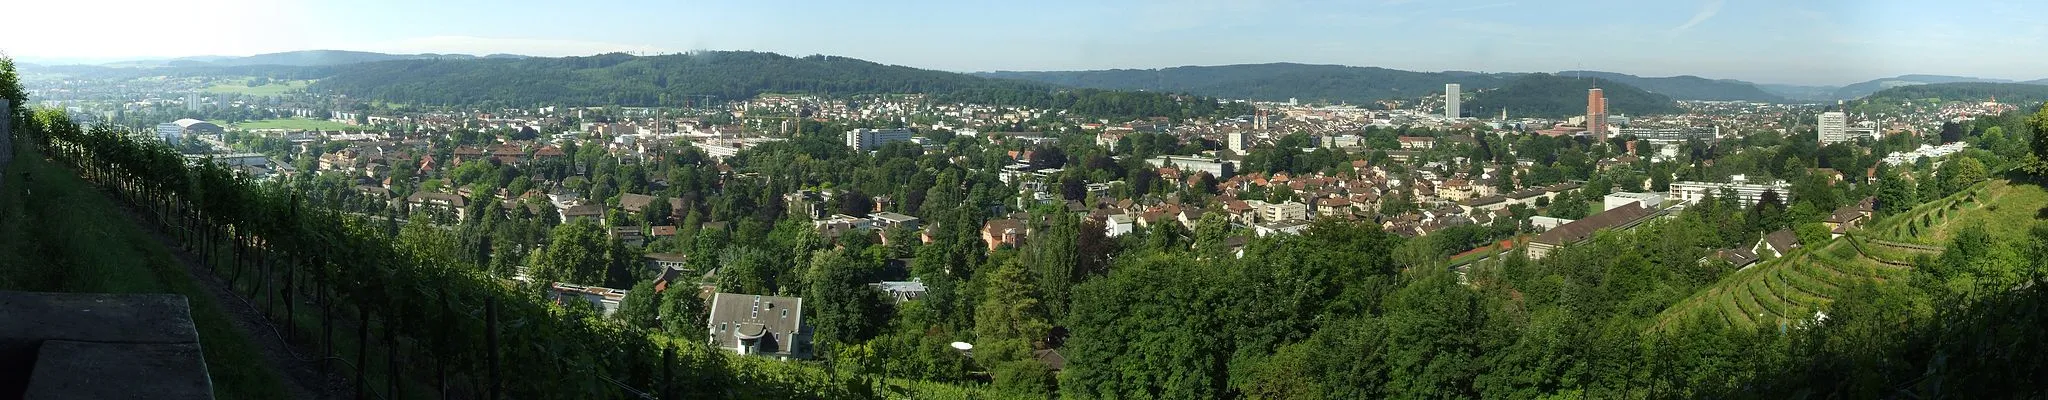 Photo showing: The view from the "Bäumli Park" to the Gardencity Winterthur, Switzerland